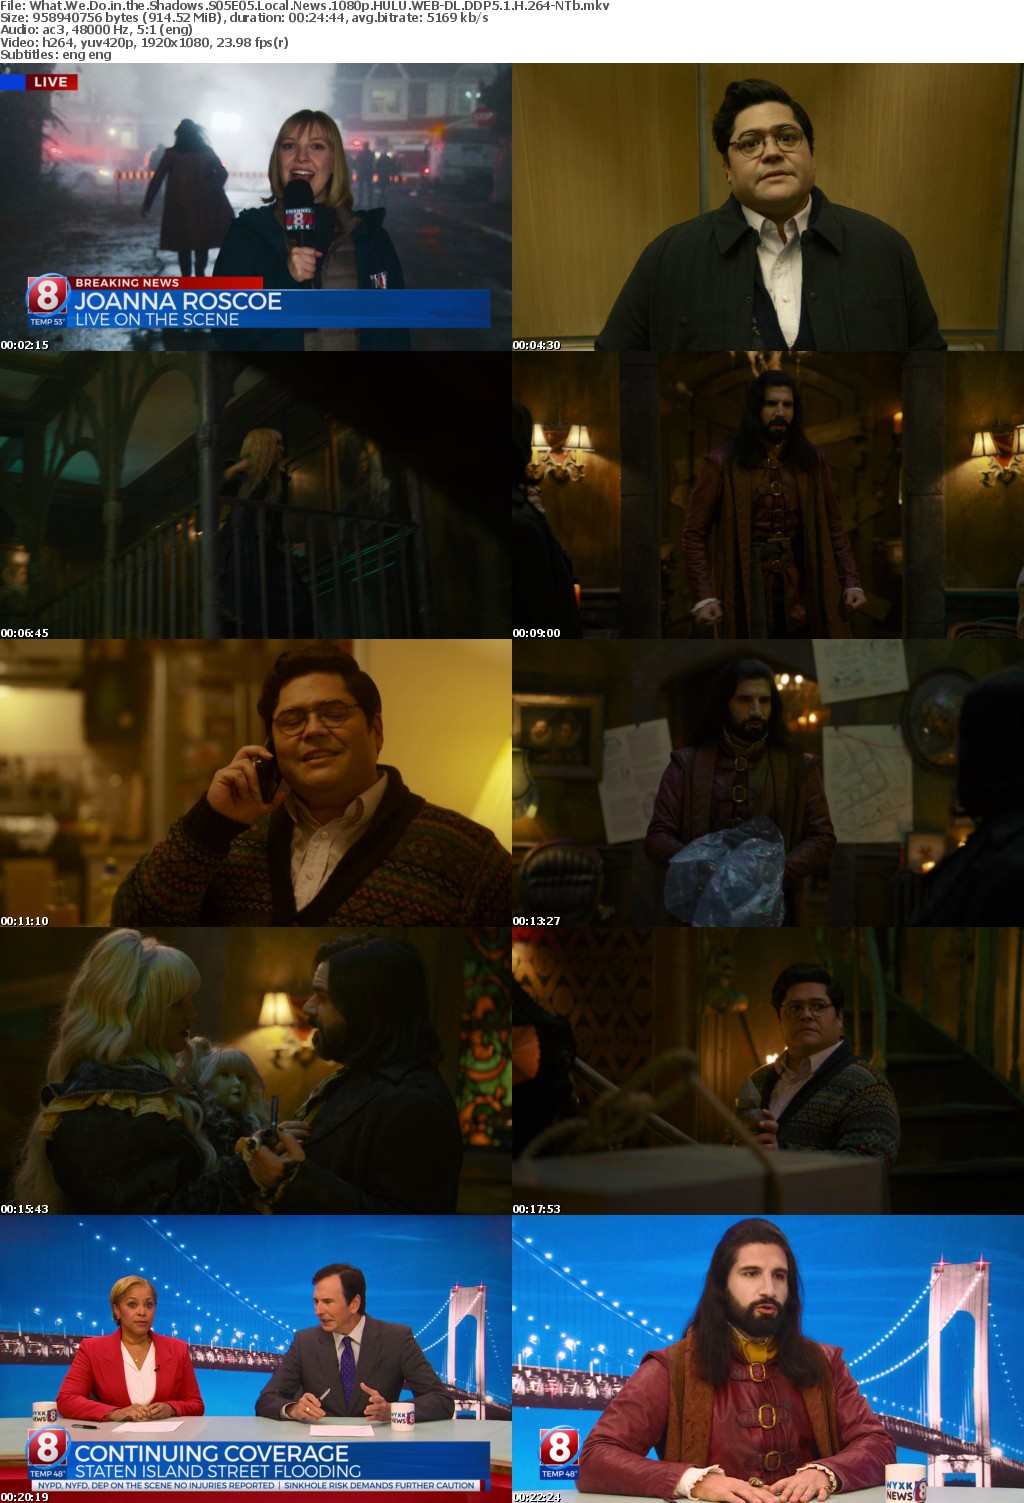 What We Do in the Shadows S05E05 Local News 1080p HULU WEB-DL DDP5 1 H 264-NTb